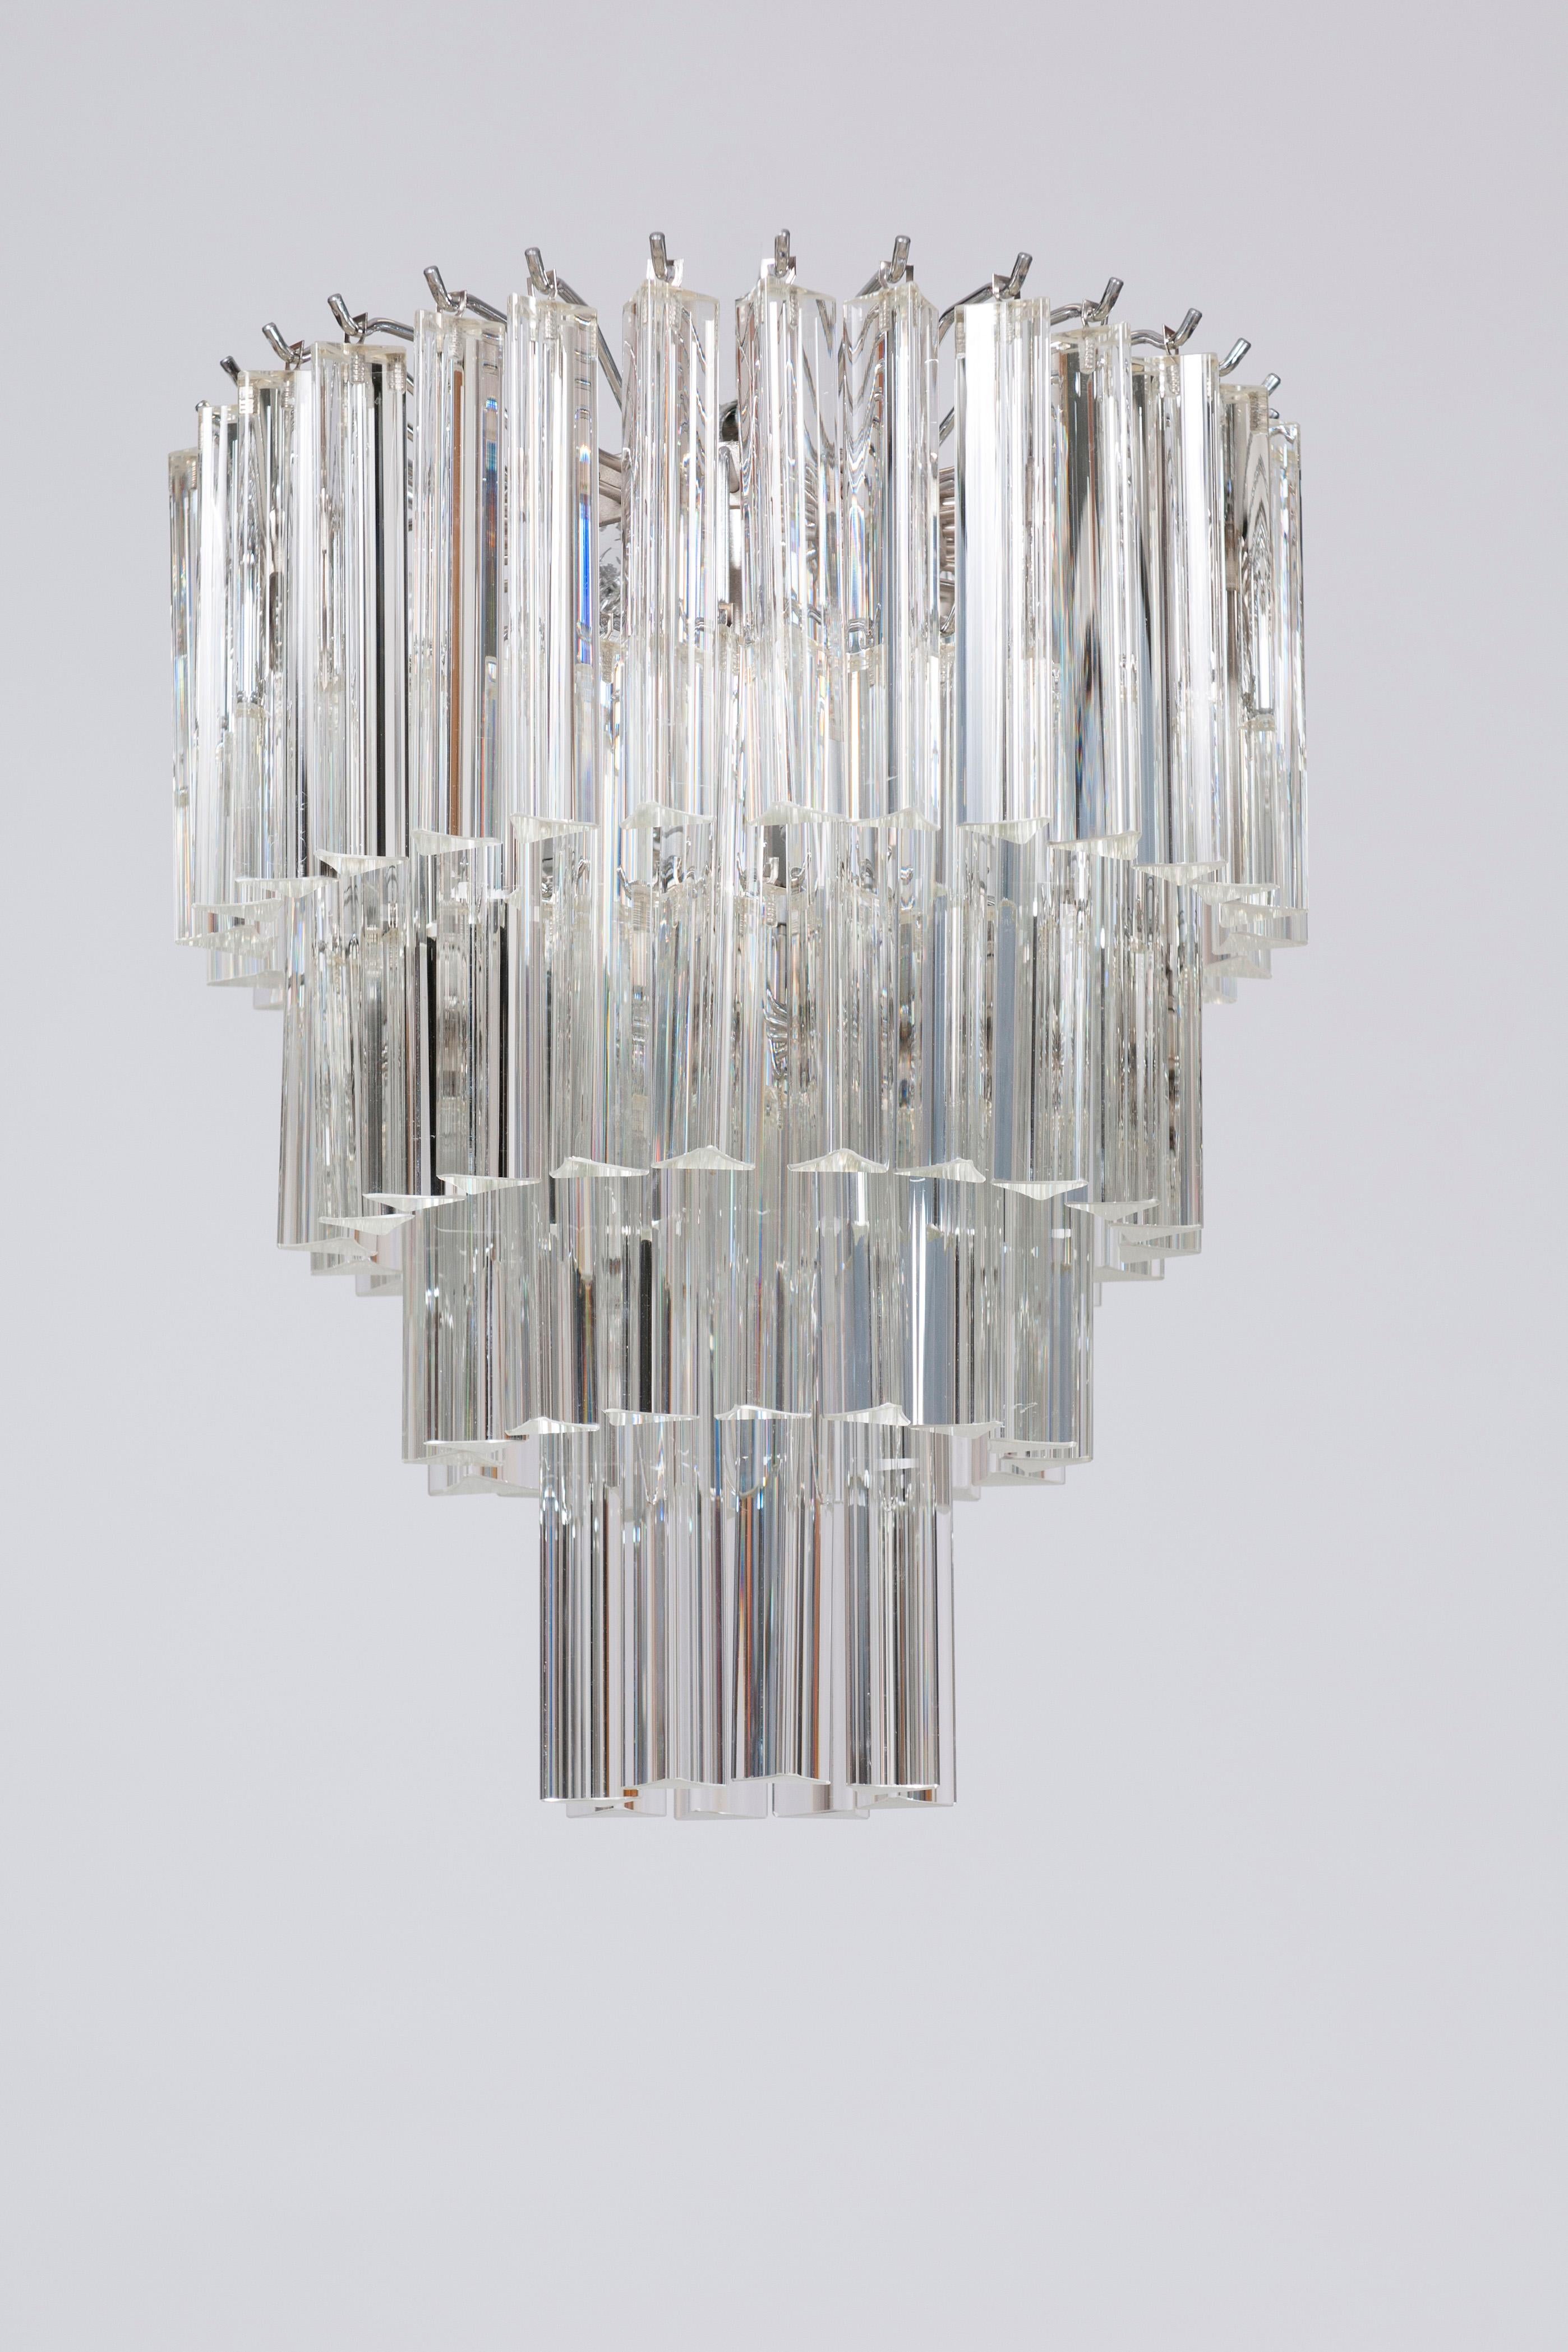 Modern Murano Glass Lighting with clear elements Italy contemporary.
This outstanding chandelier brings within itself a refined touch of Venice, through its elegant shape and its bright lights, the result of the Venetian centuries-old glassmaking